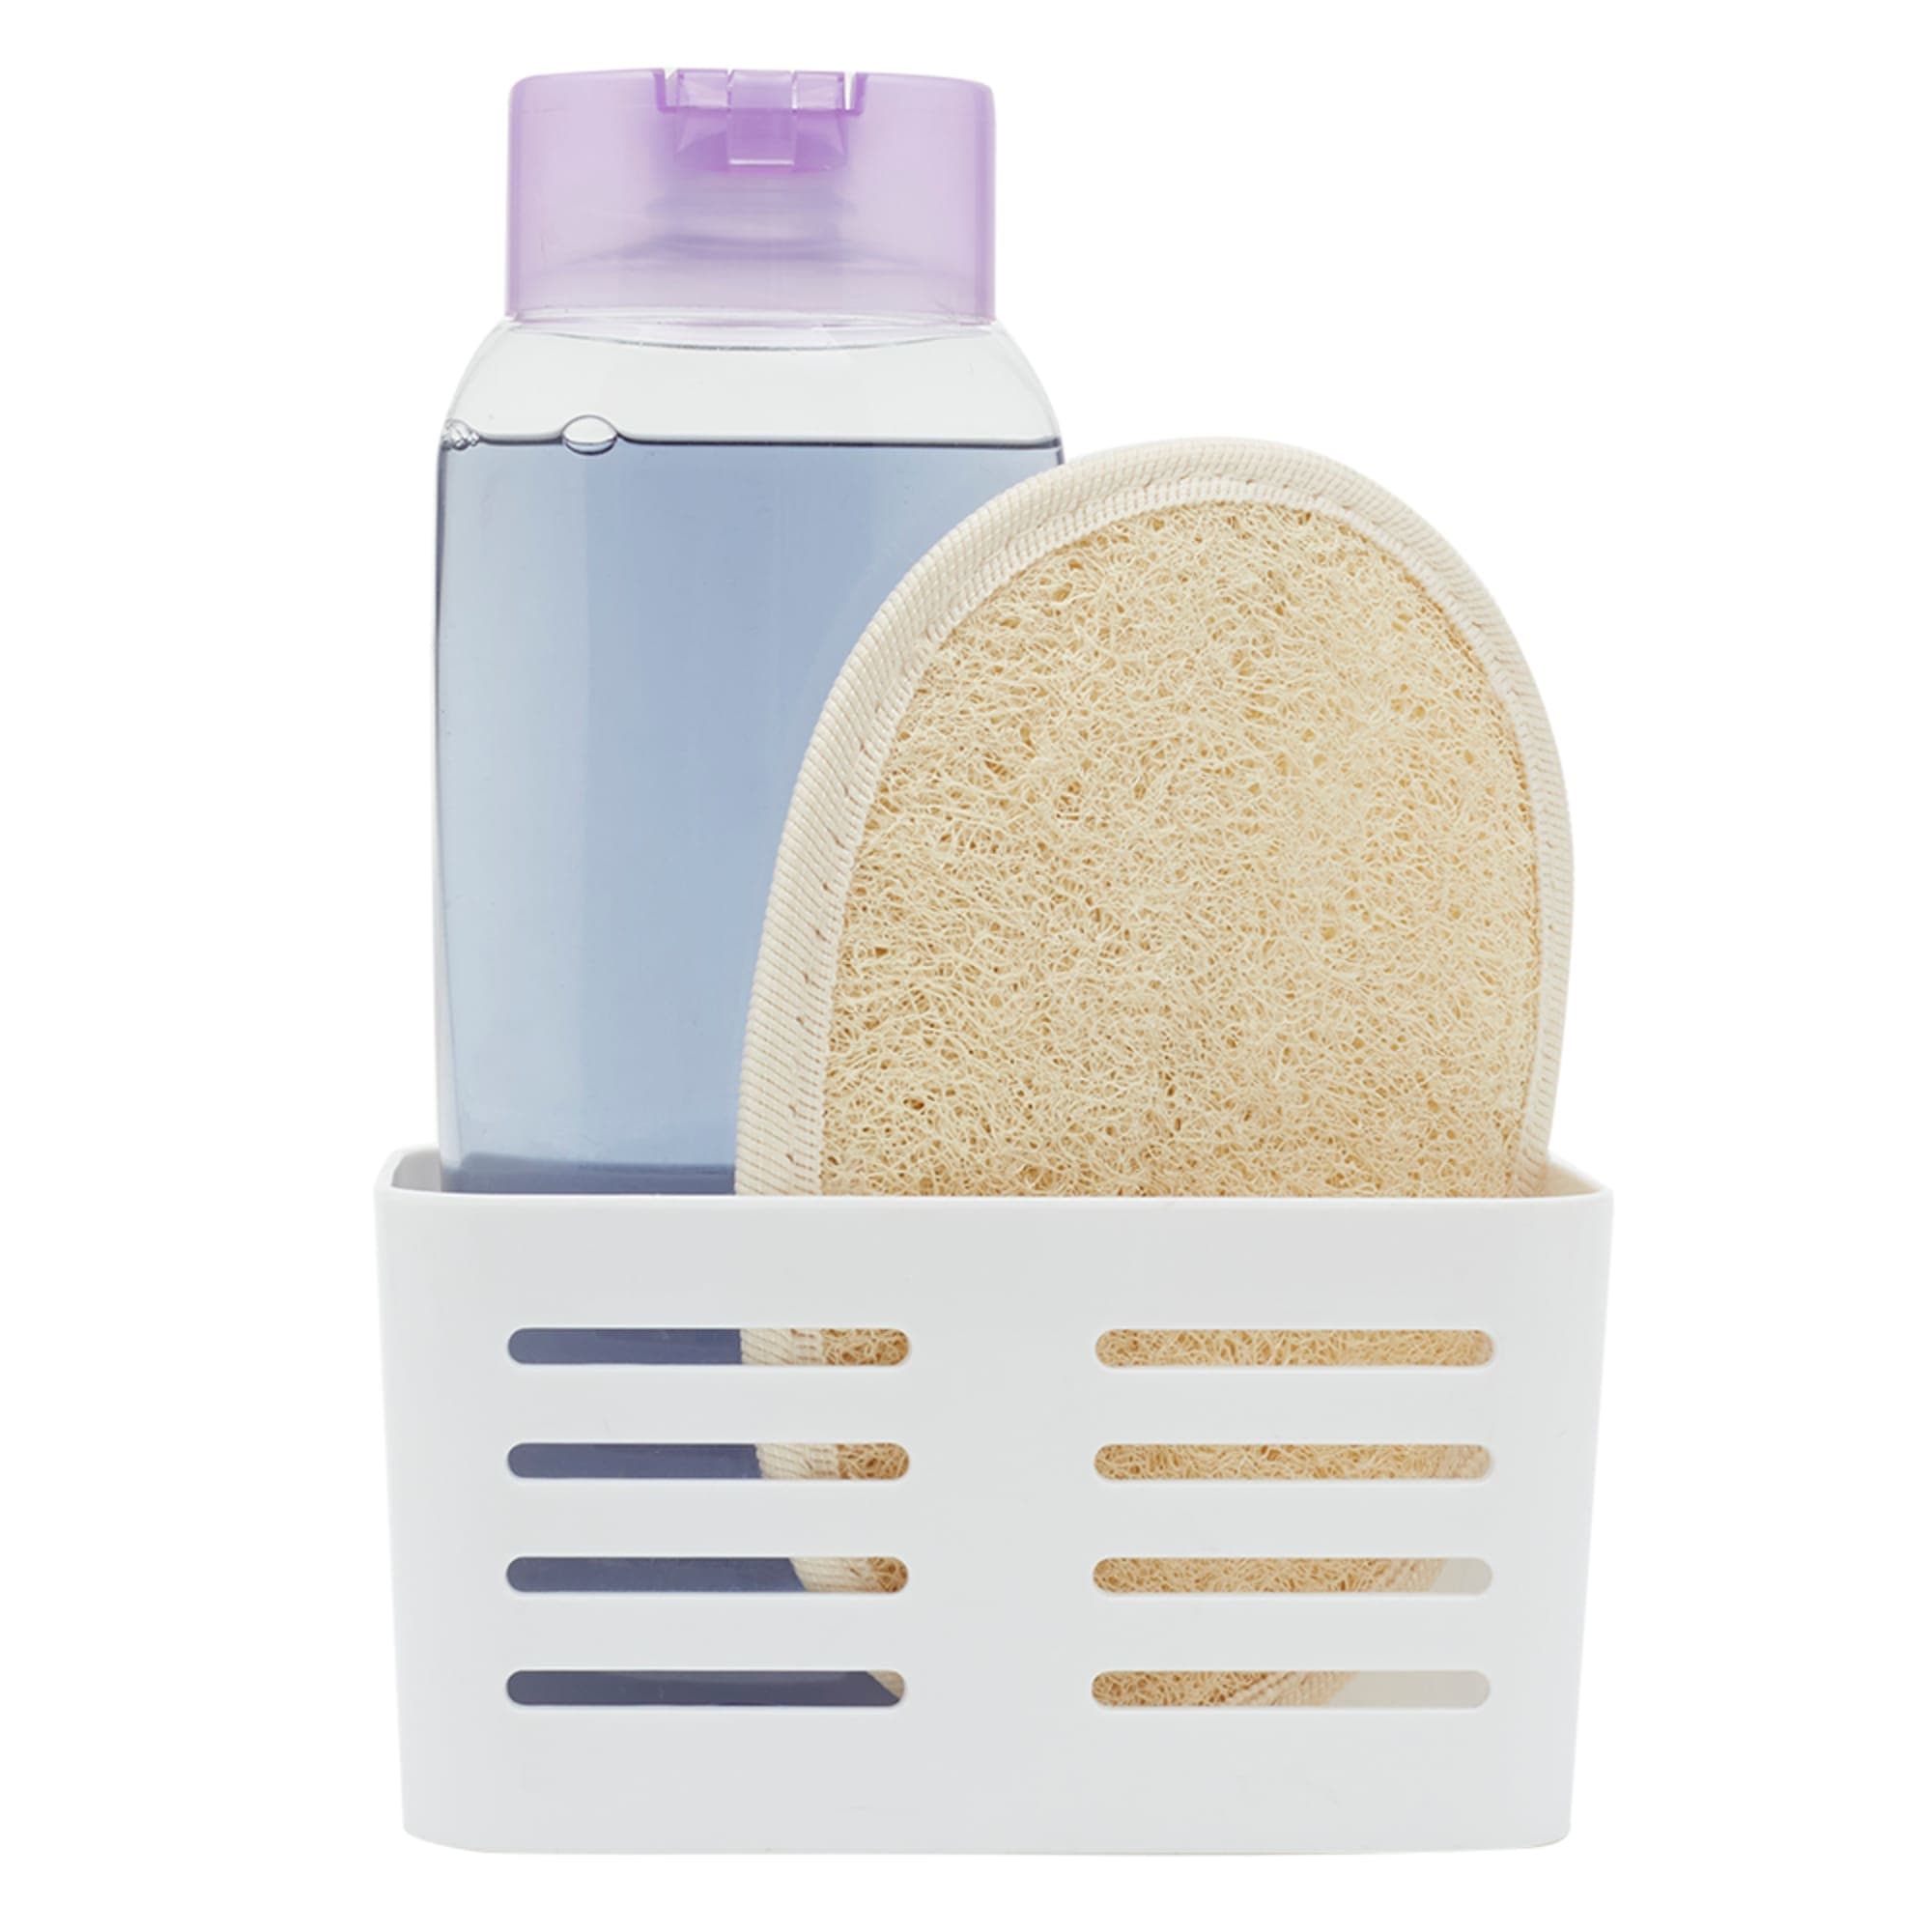 Home Basics Serenity Wide Bath Caddy with Suction, White $2.00 EACH, CASE PACK OF 24